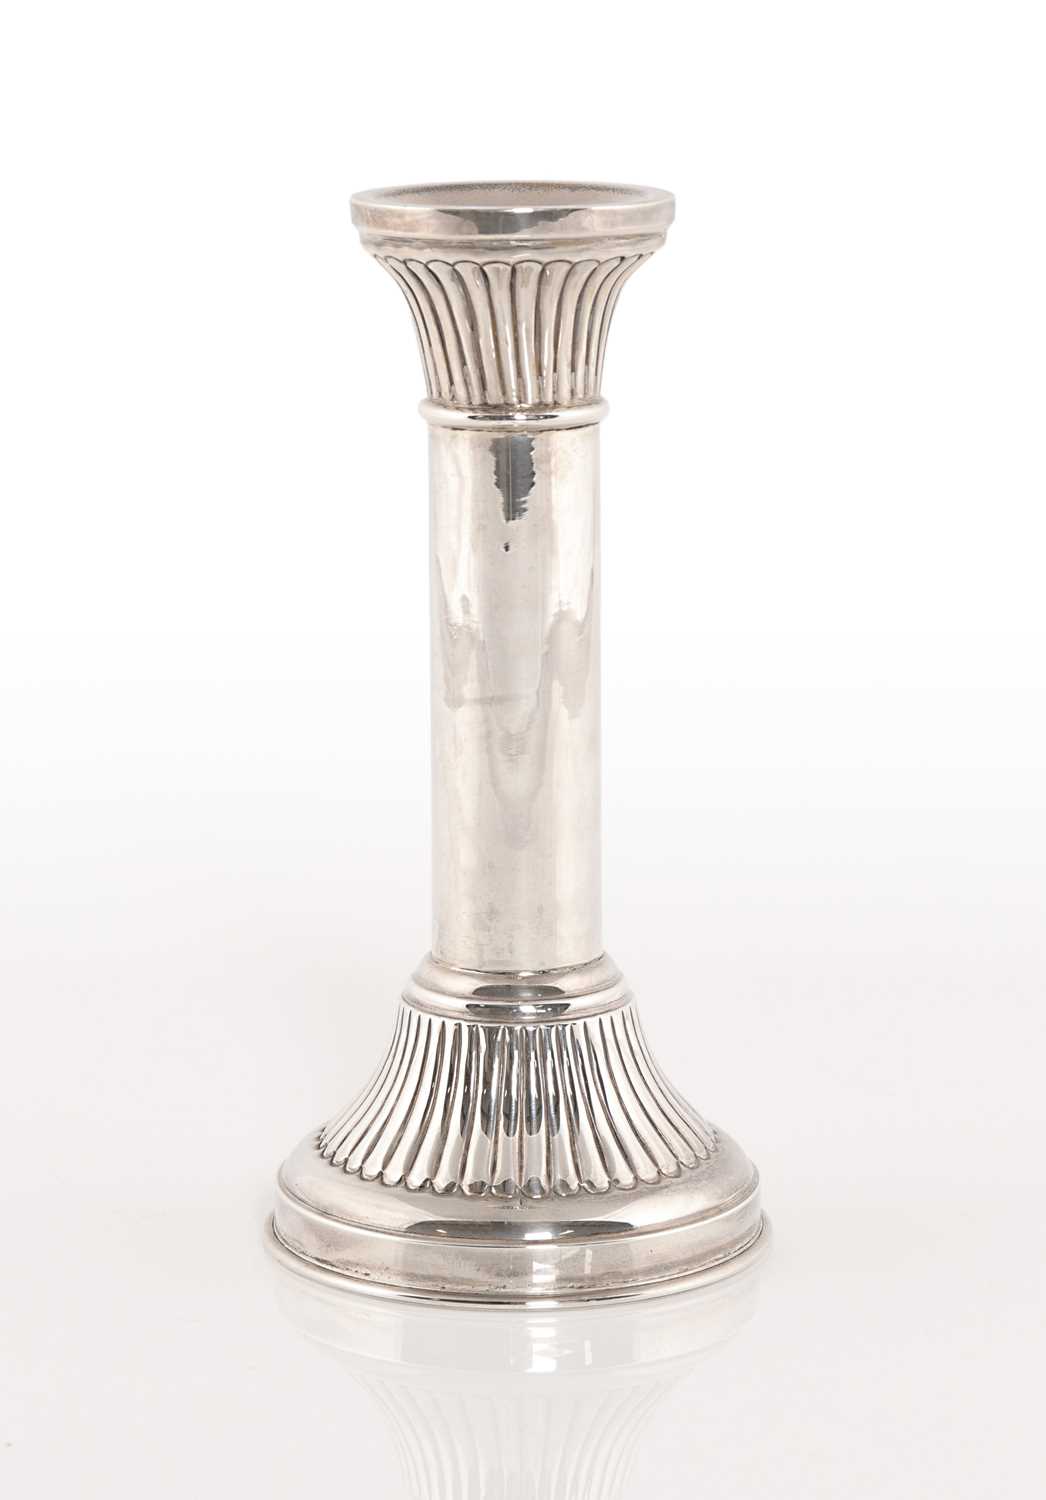 Lot 56 - Silver Candlestick